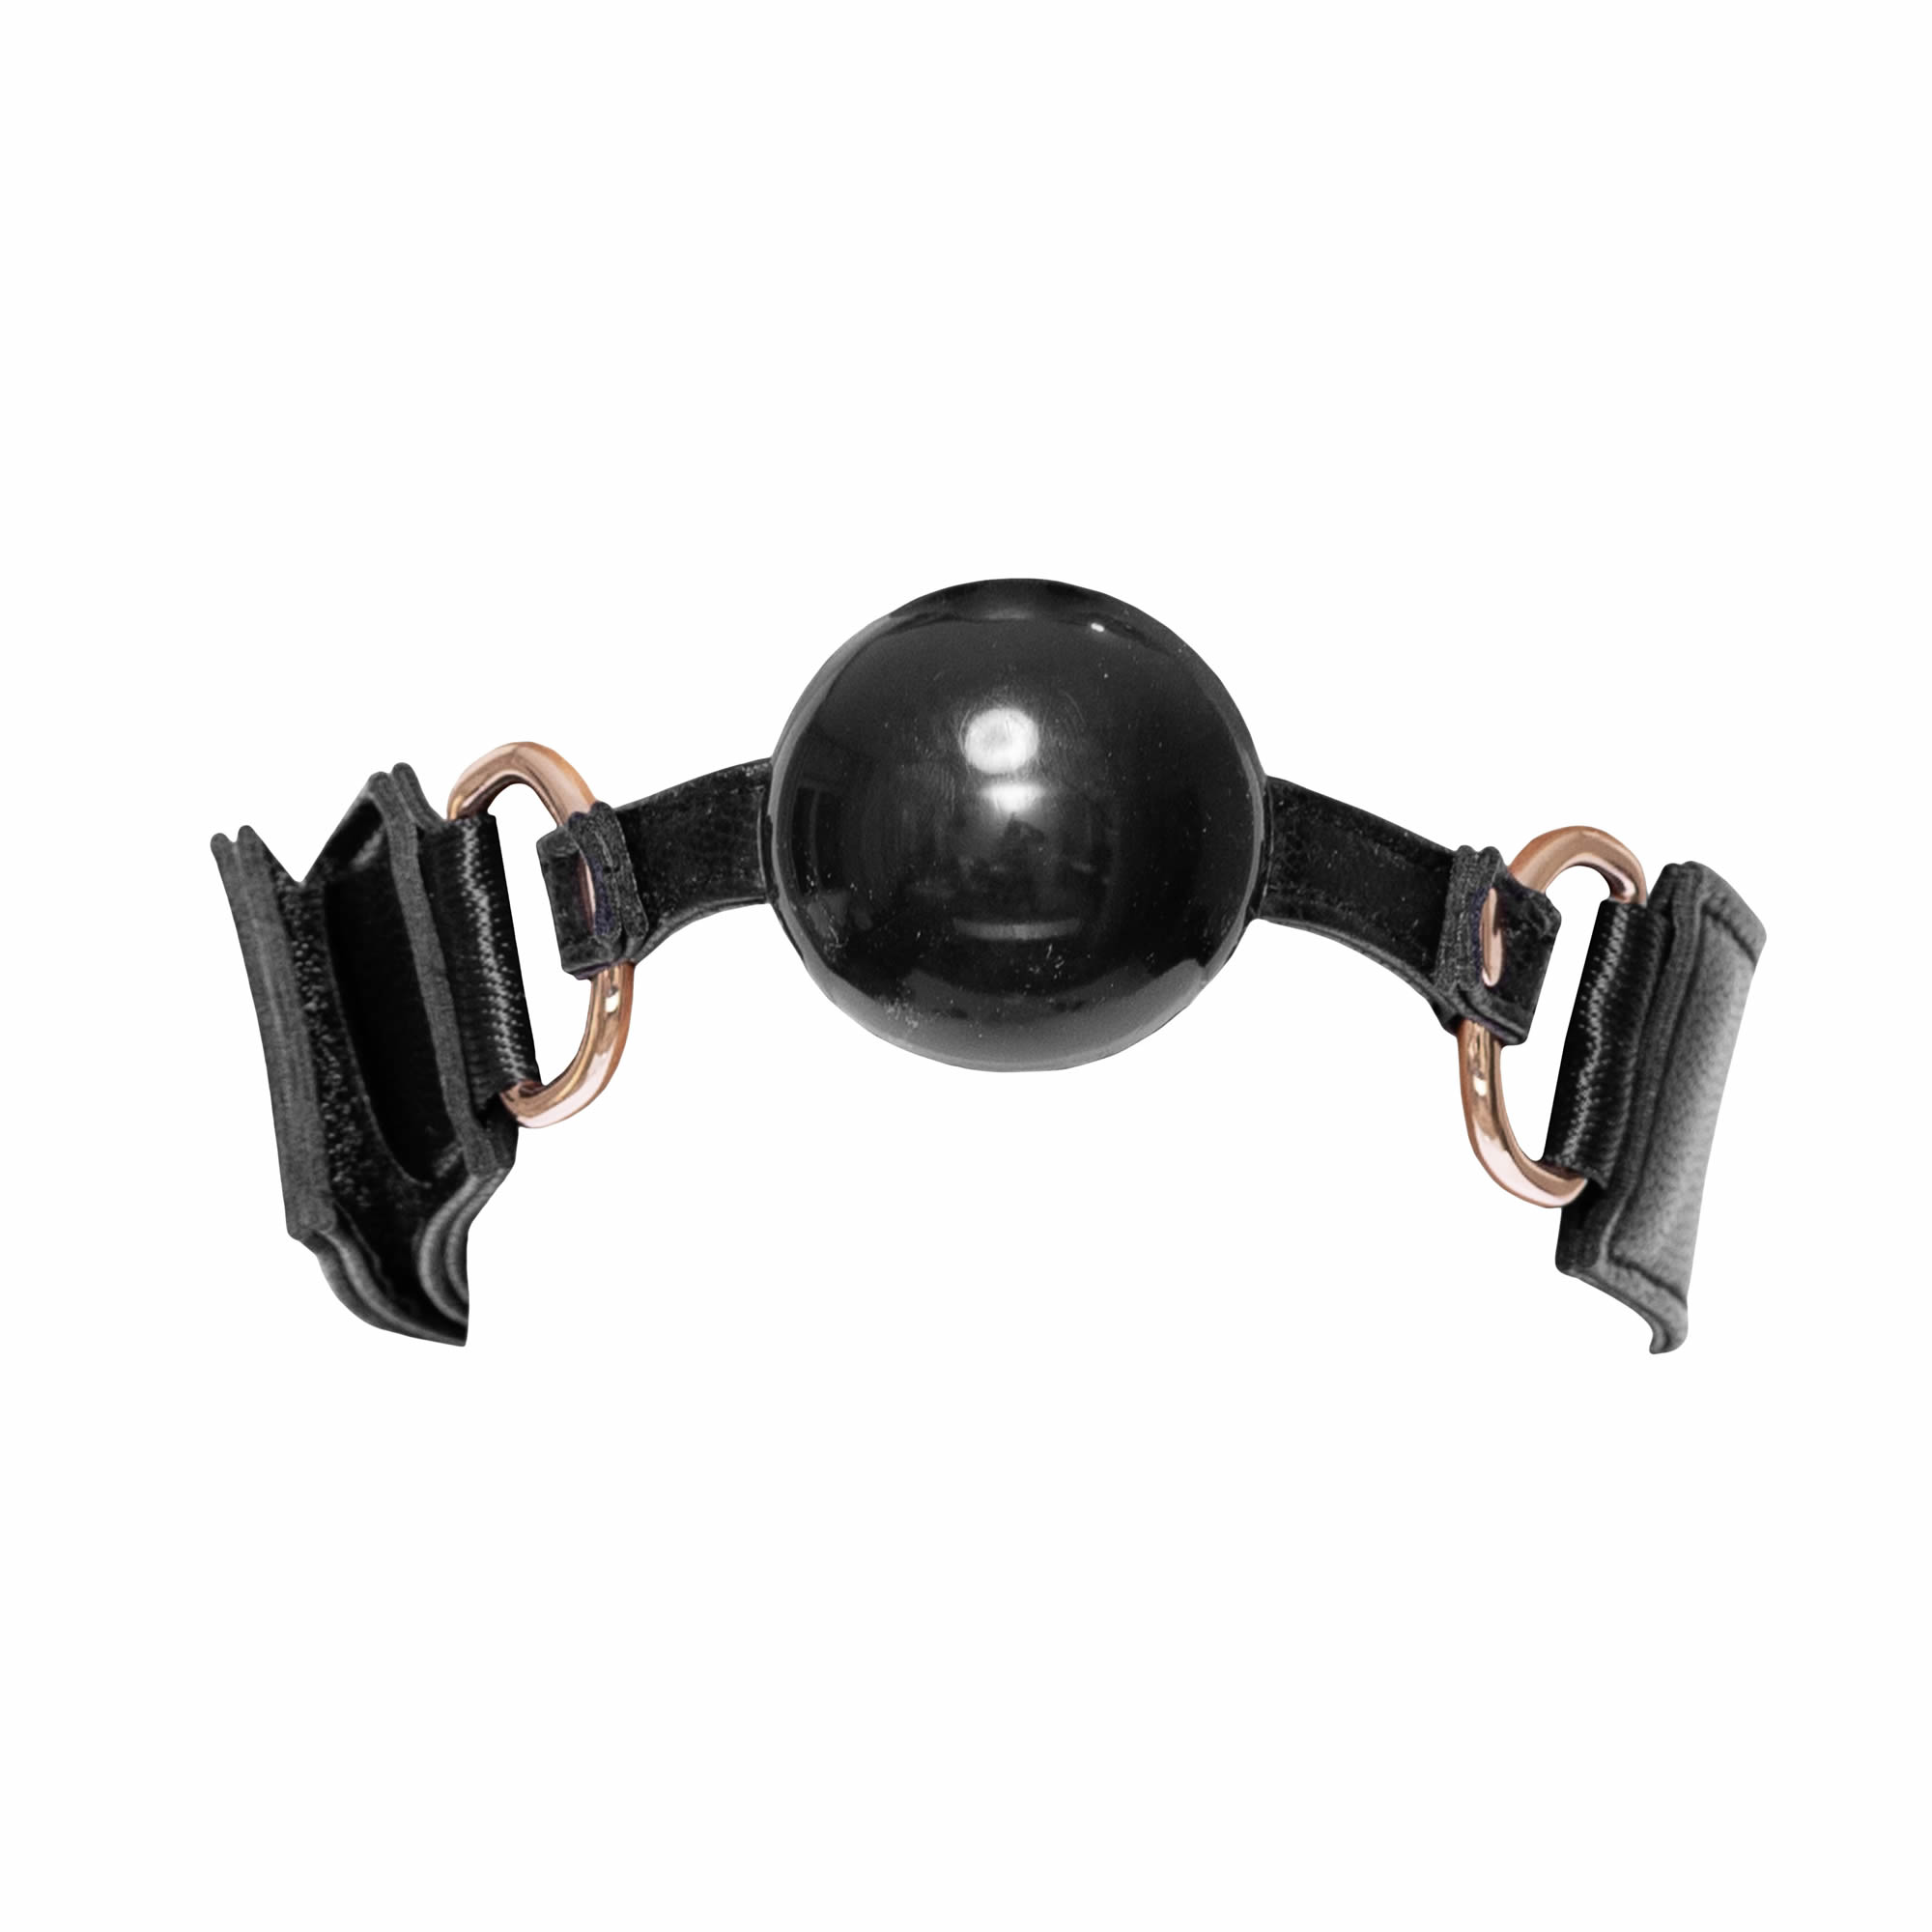 Bad Kitty Gag Ball in Silicone with Handcuffs